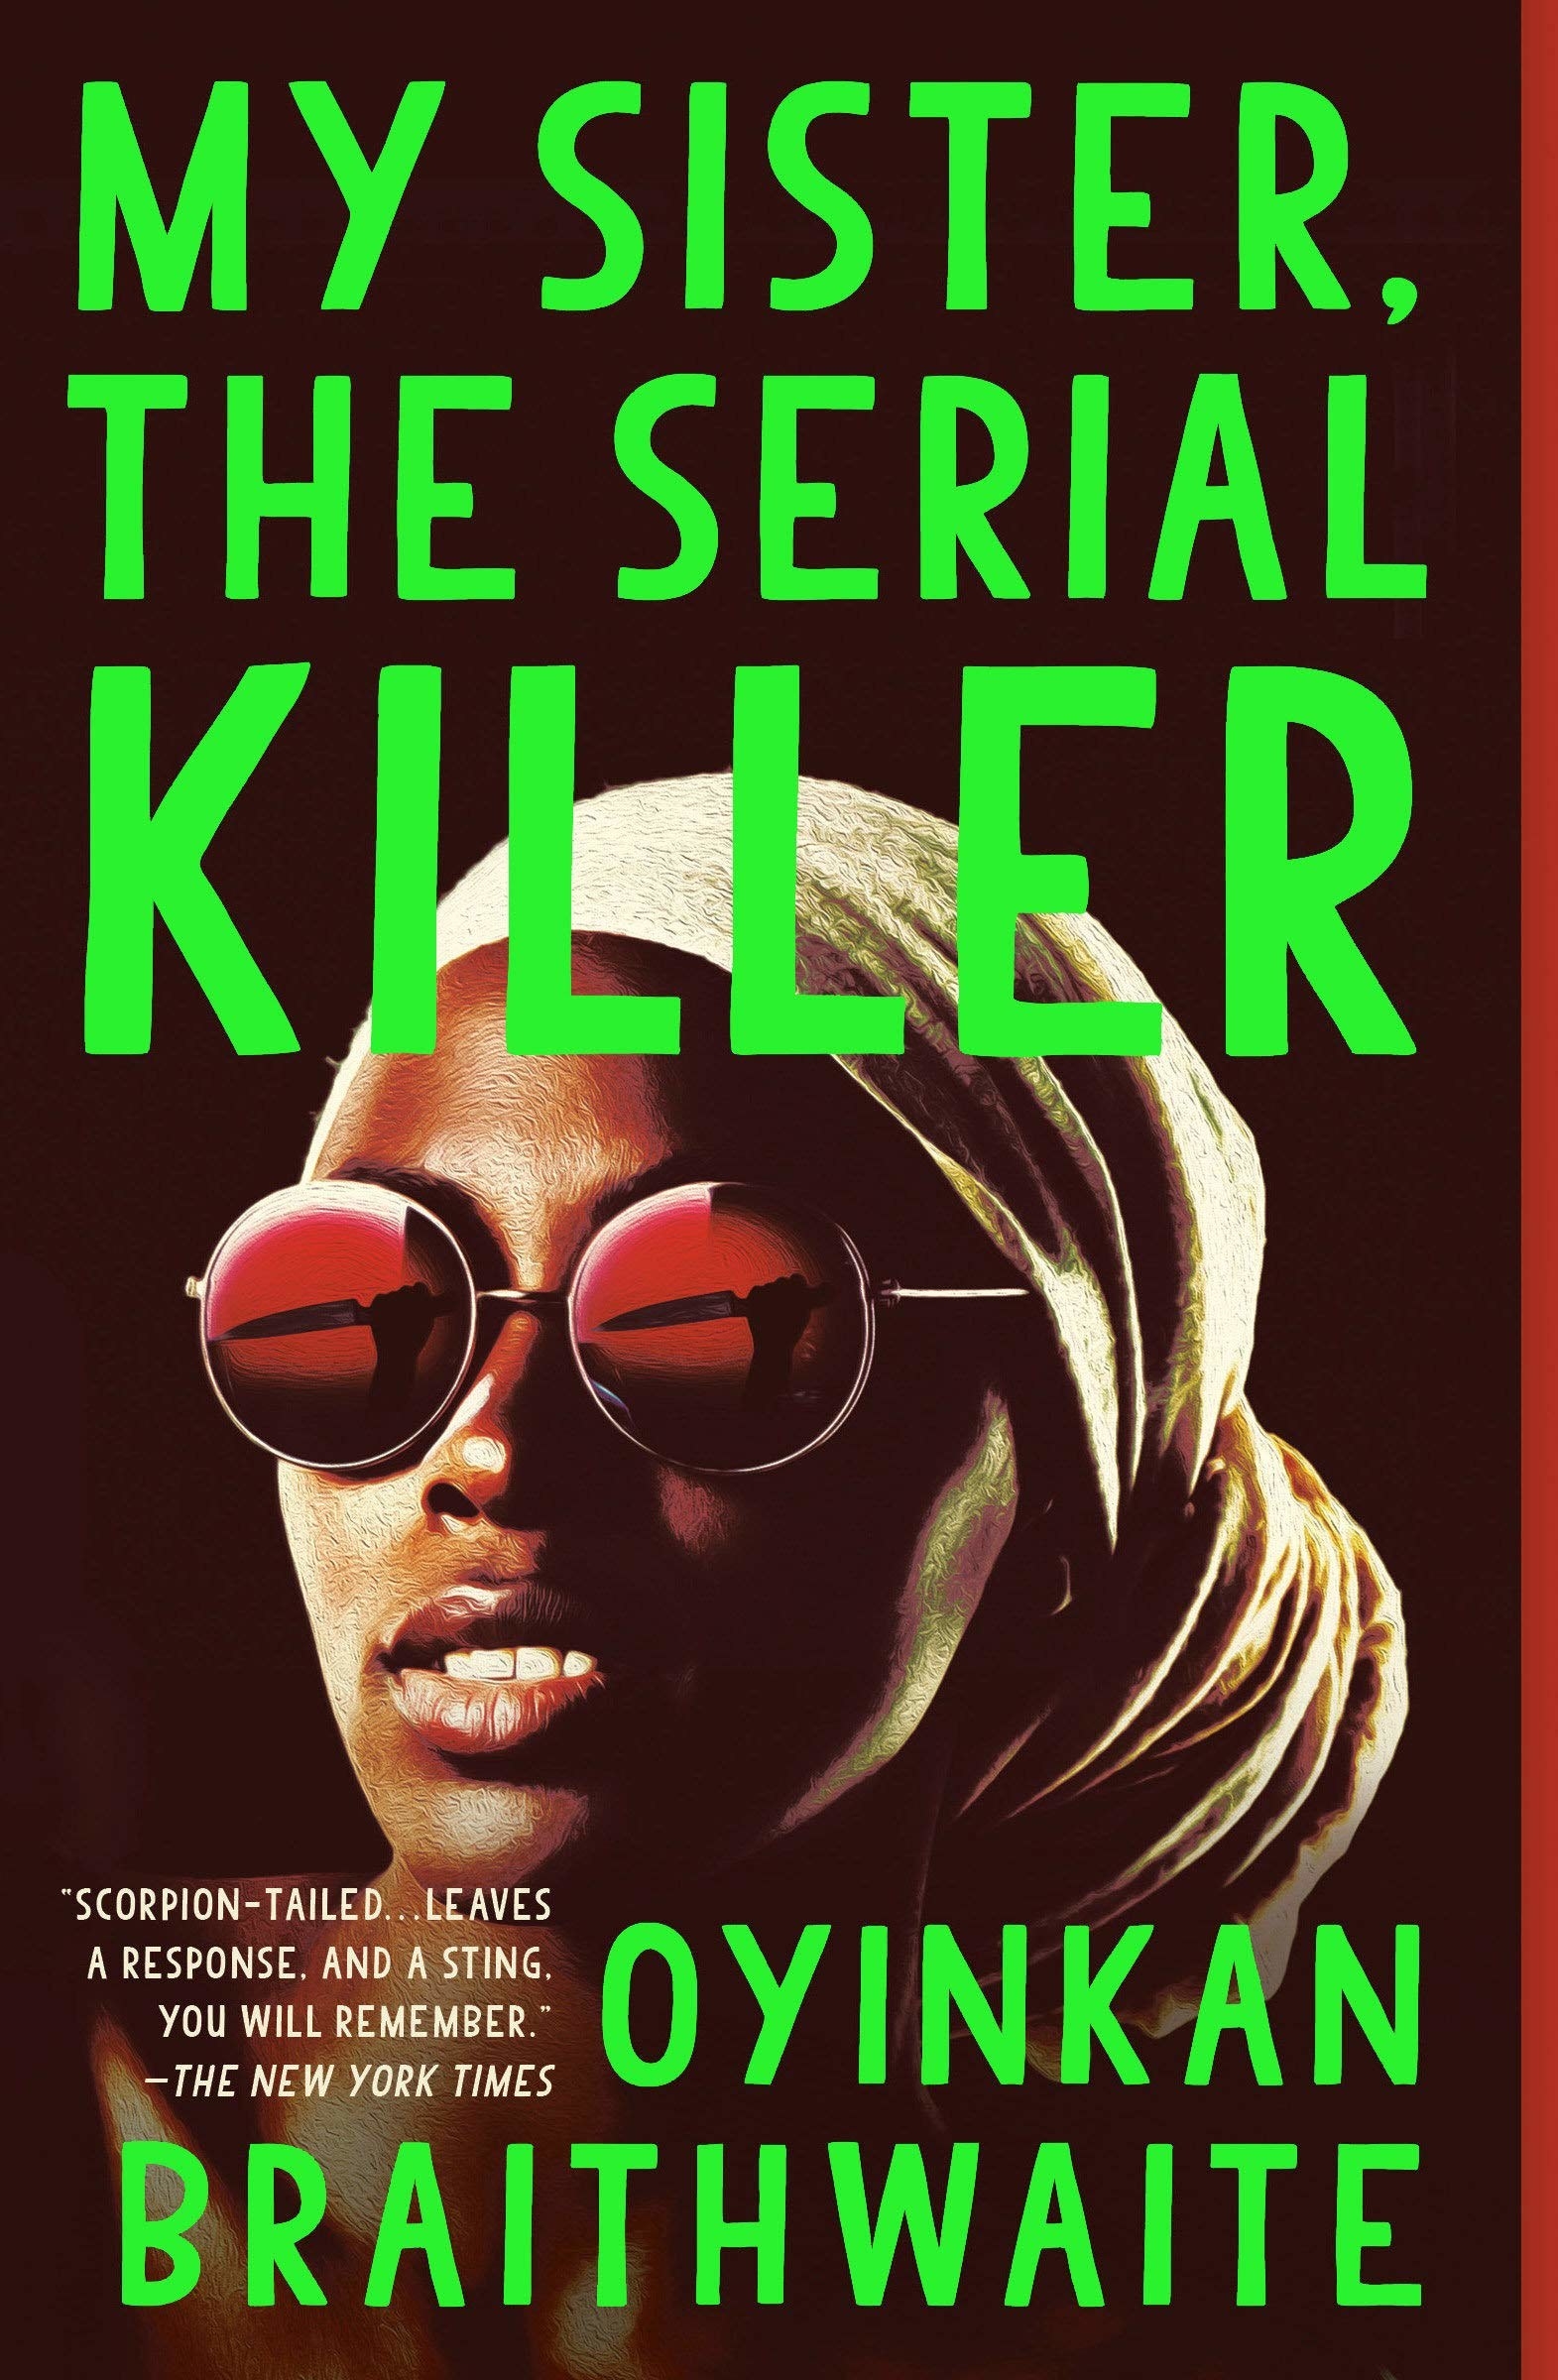 The book cover featuring a woman wearing a head wrap and sunglasses